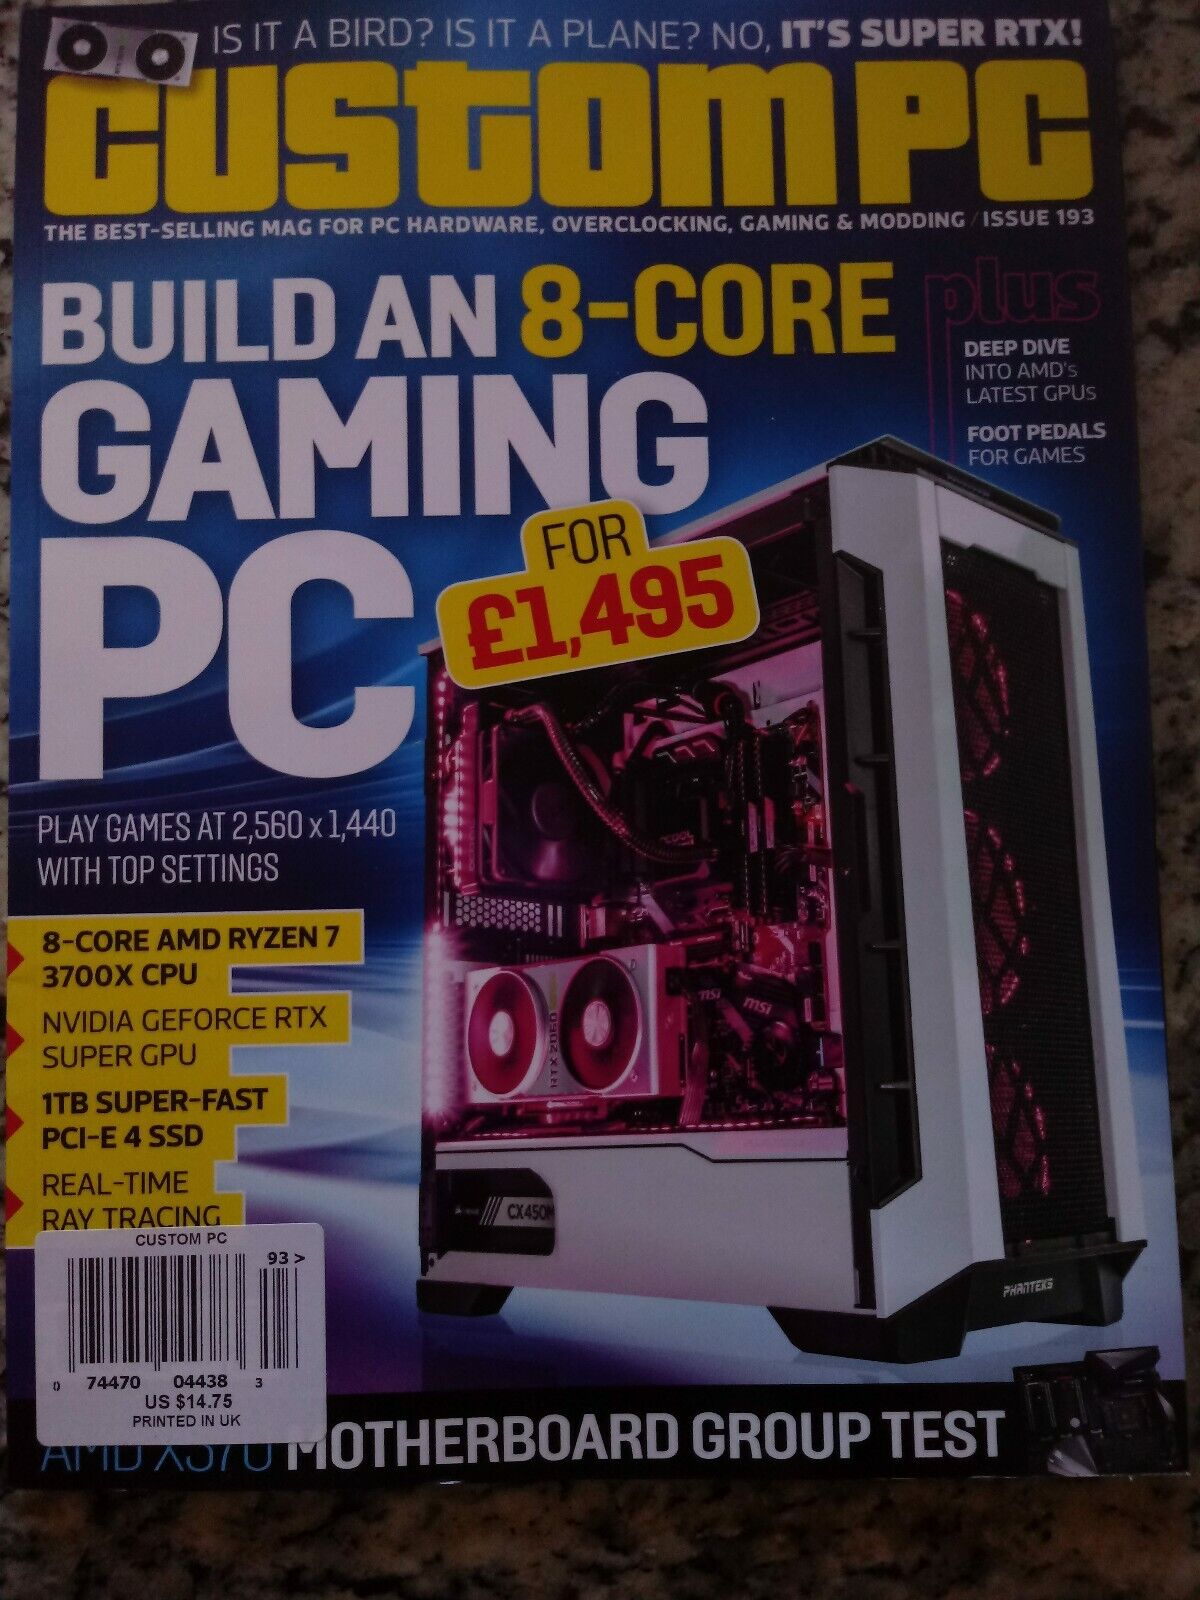 Custom pc build an 8-core gaming pc issue 193 oct.2019